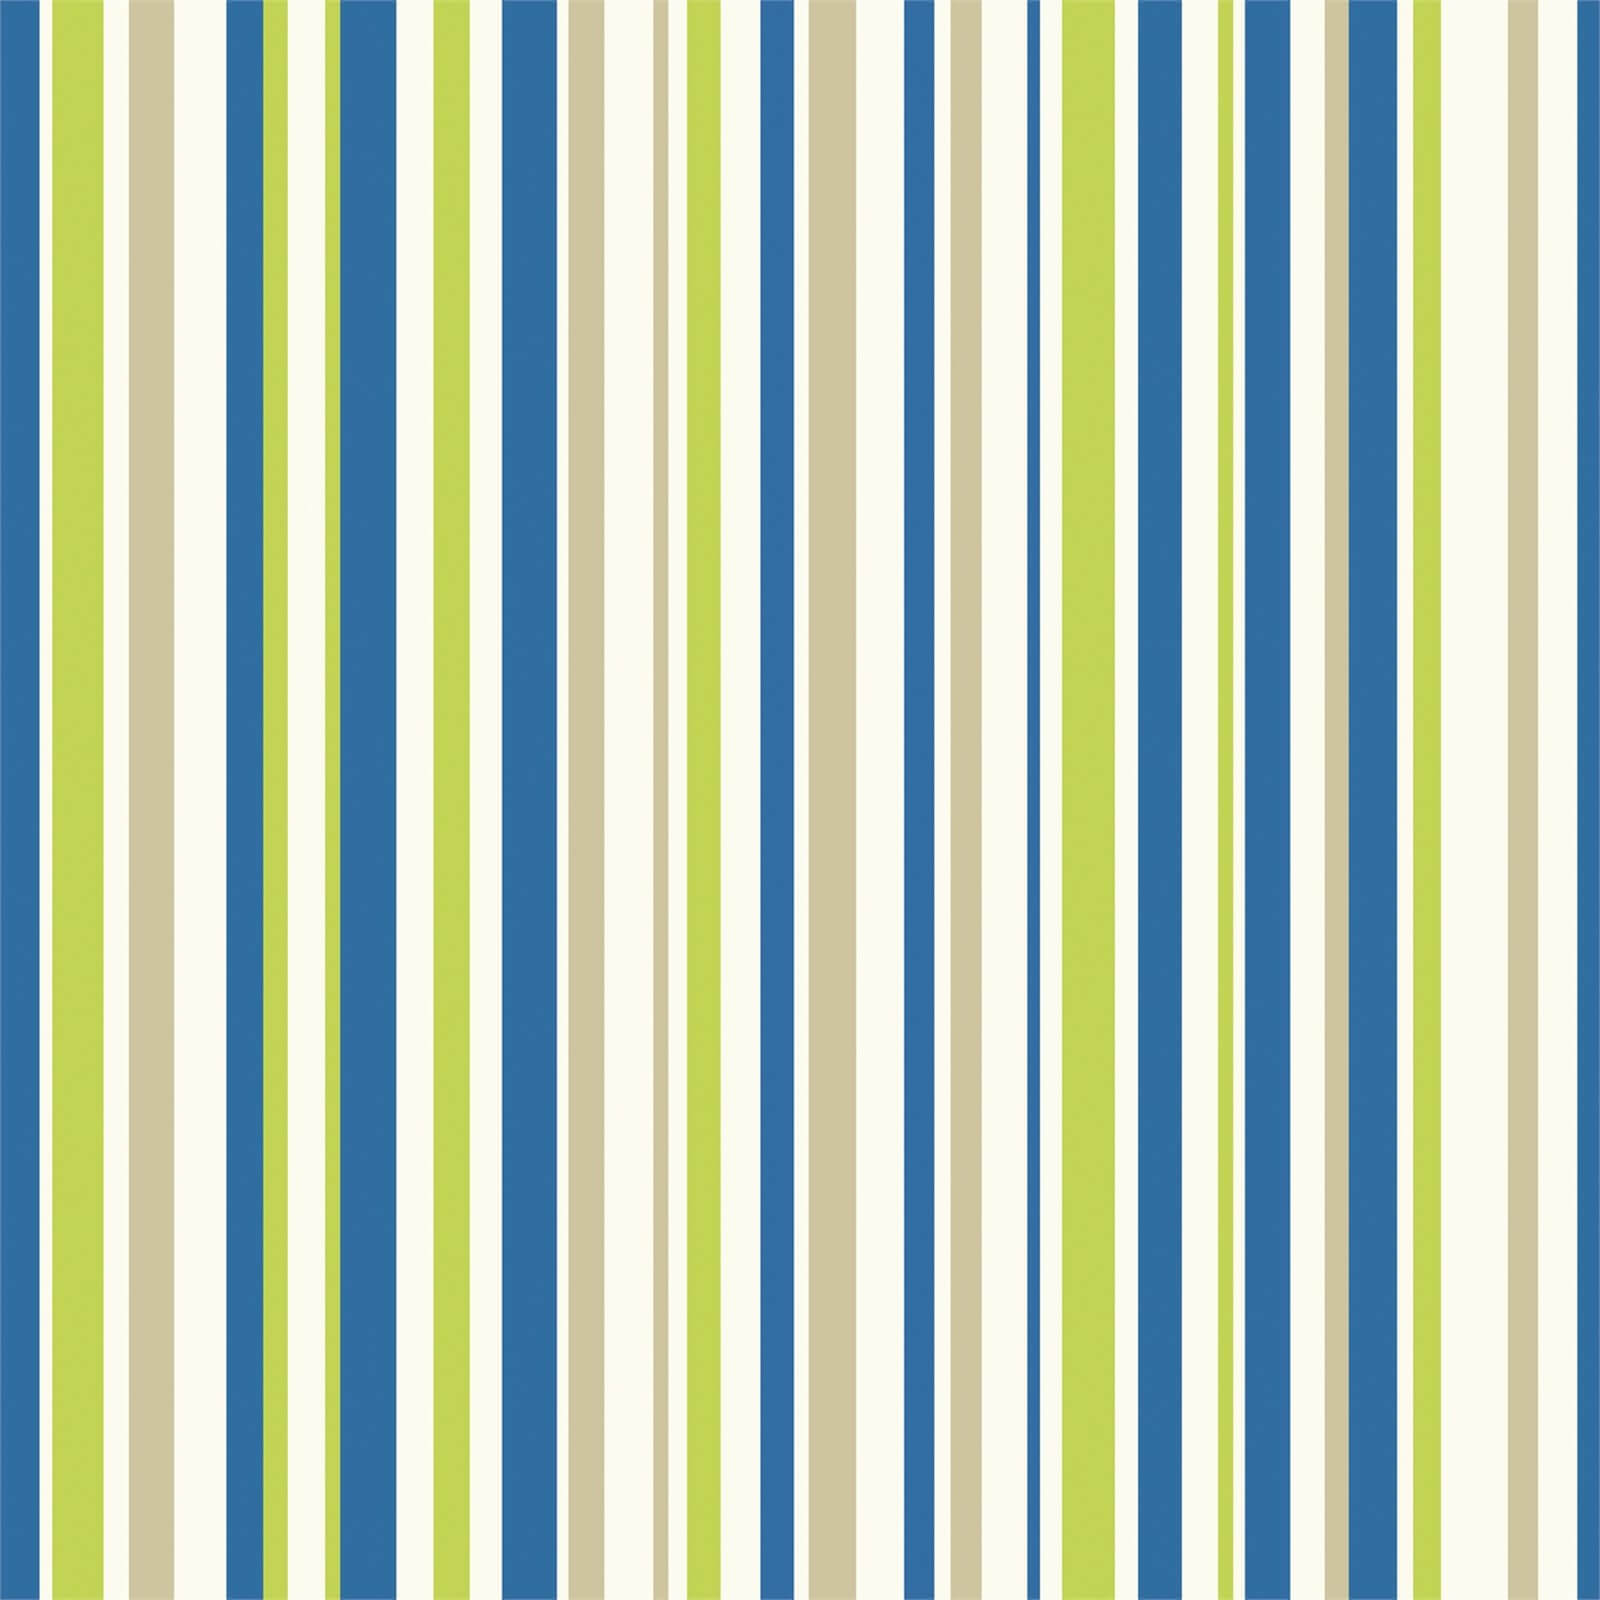 Arthouse Earn Your Stripes Kids Smooth Blue and Green Wallpaper